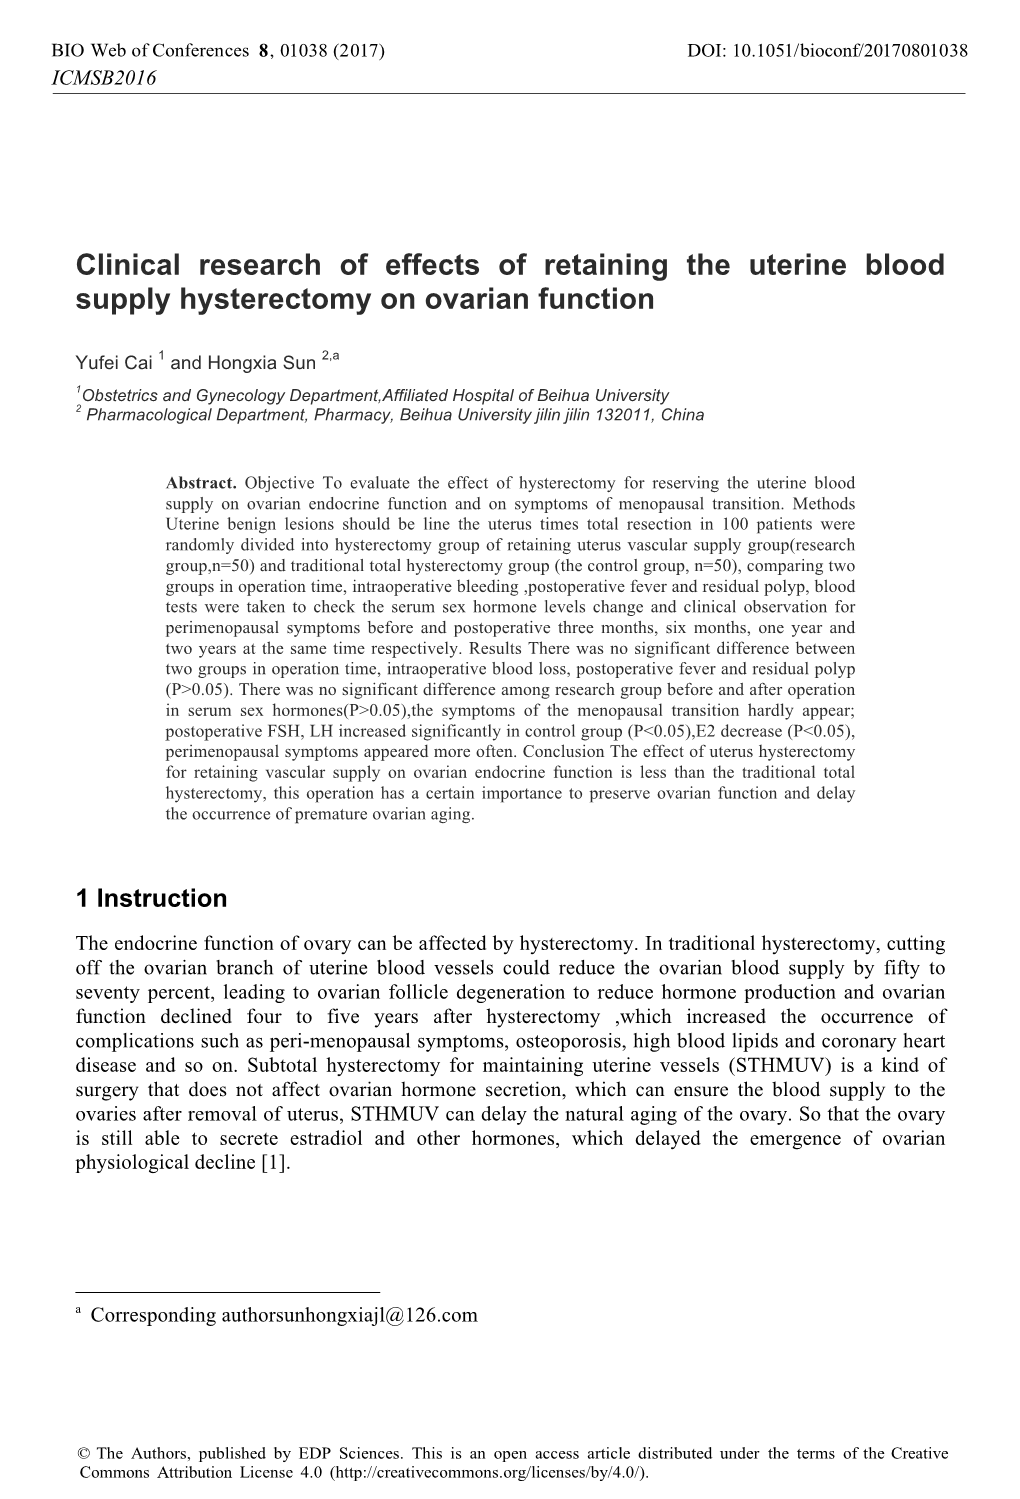 Clinical Research of Effects of Retaining the Uterine Blood Supply Hysterectomy on Ovarian Function